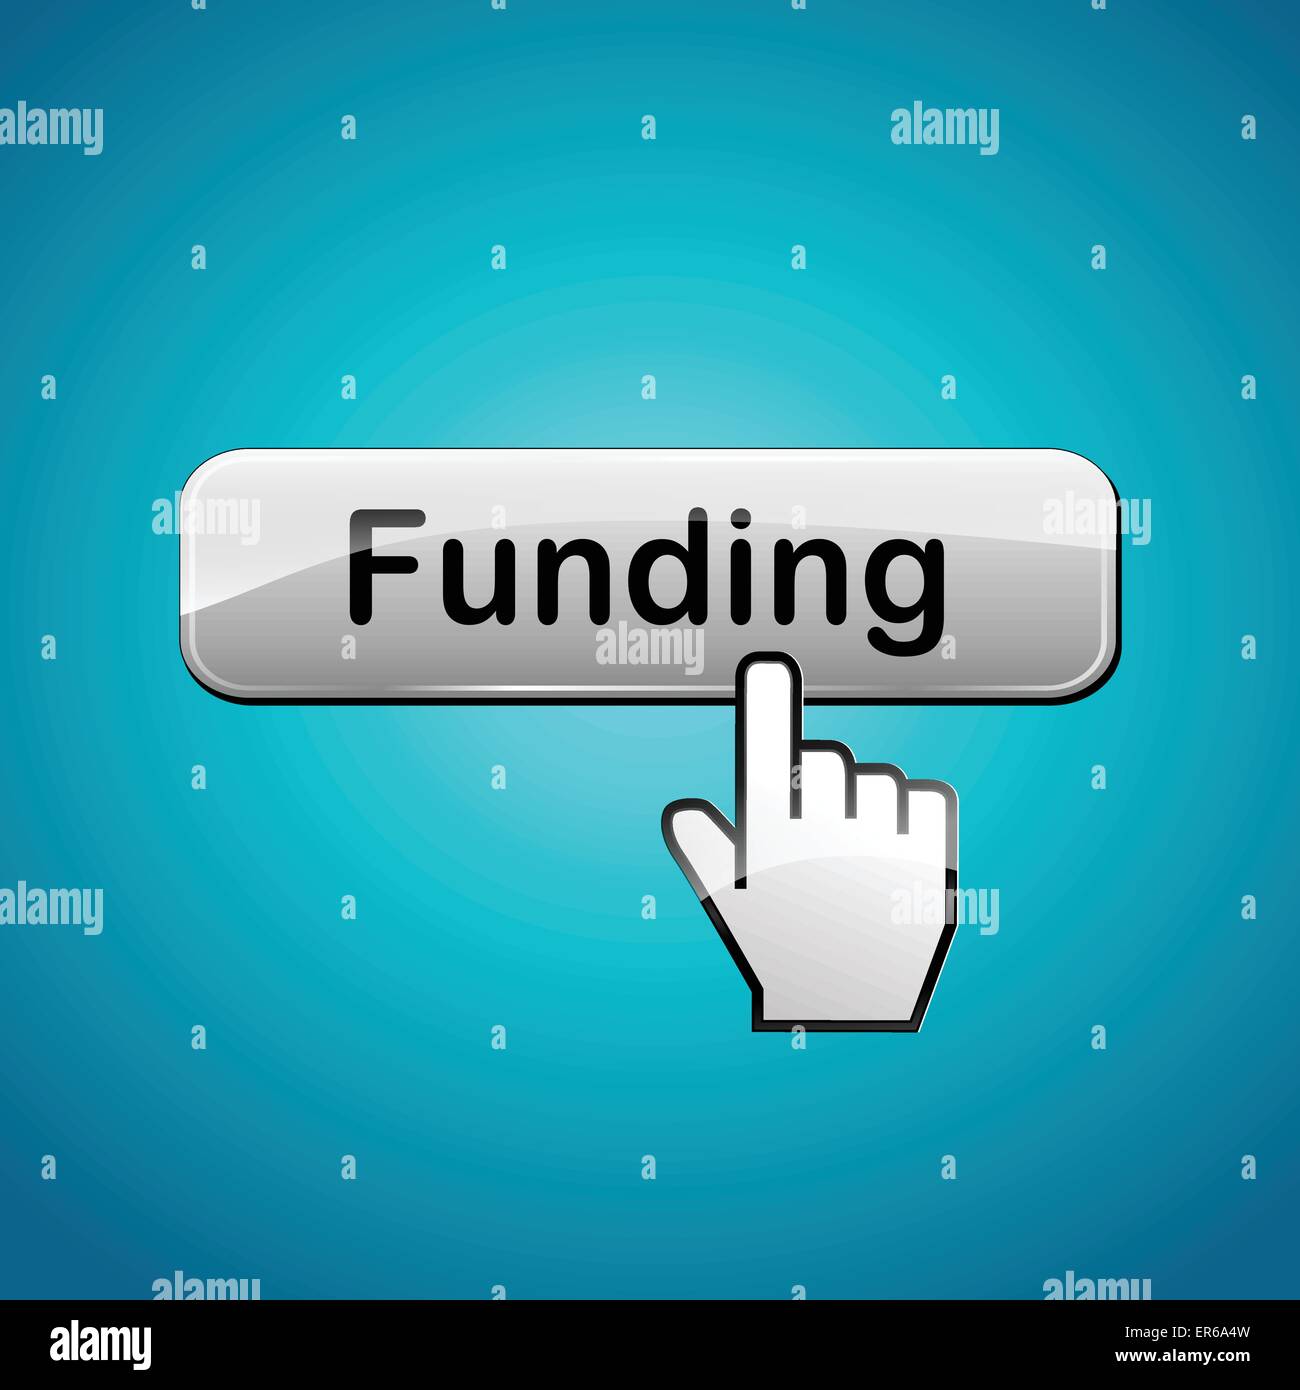 Vector illustration of funding abstract concept web button Stock Vector